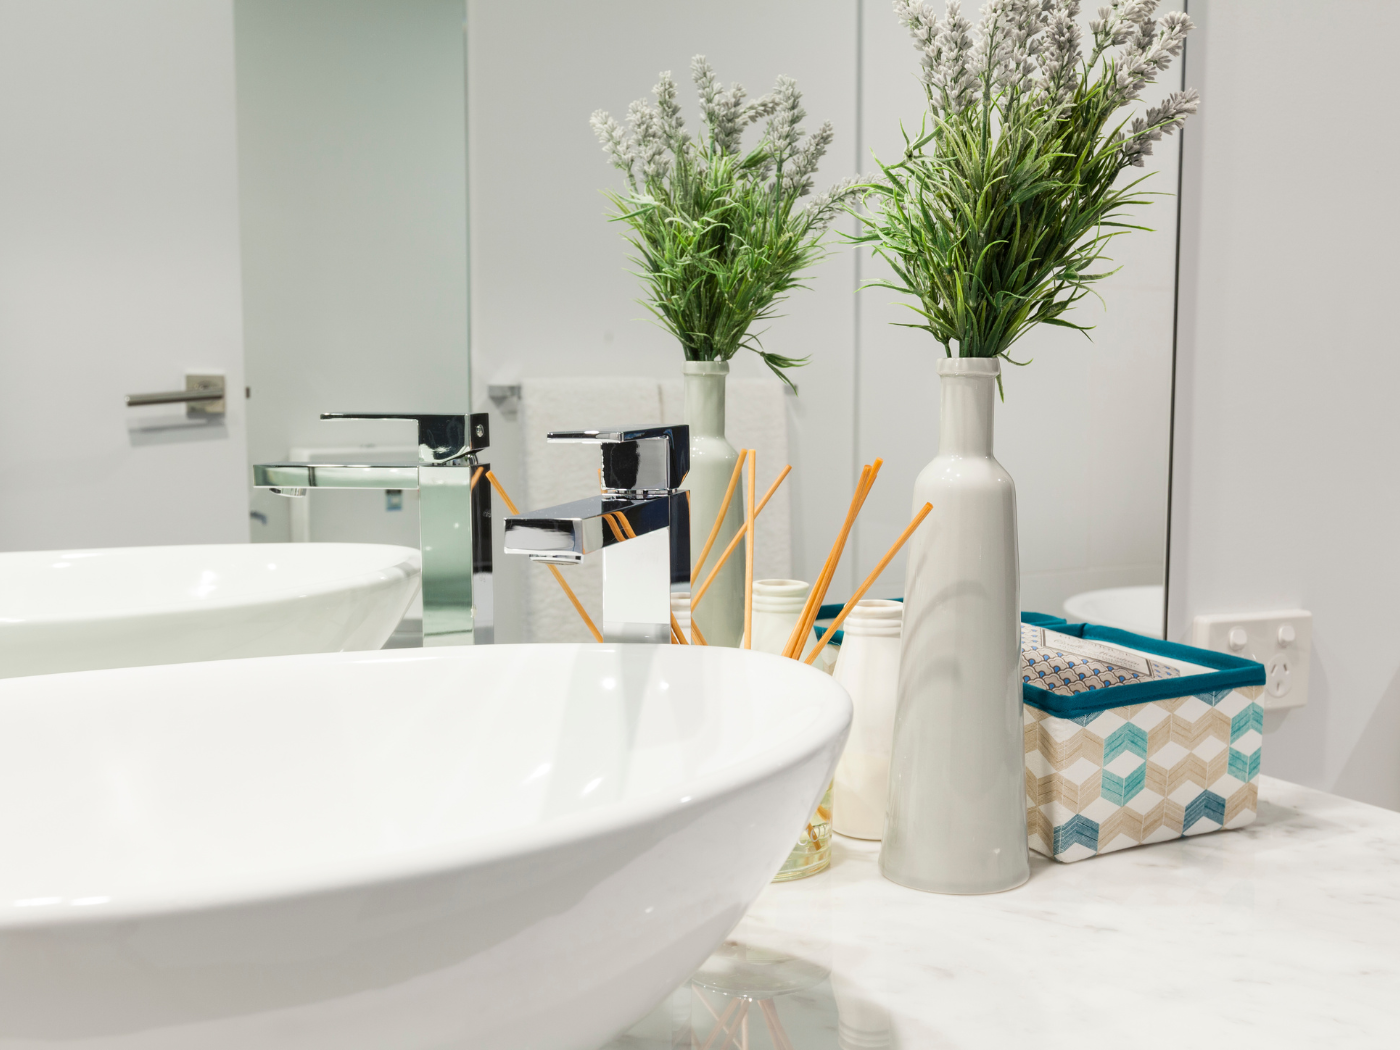 How To Make The Most Of A Small Bathroom